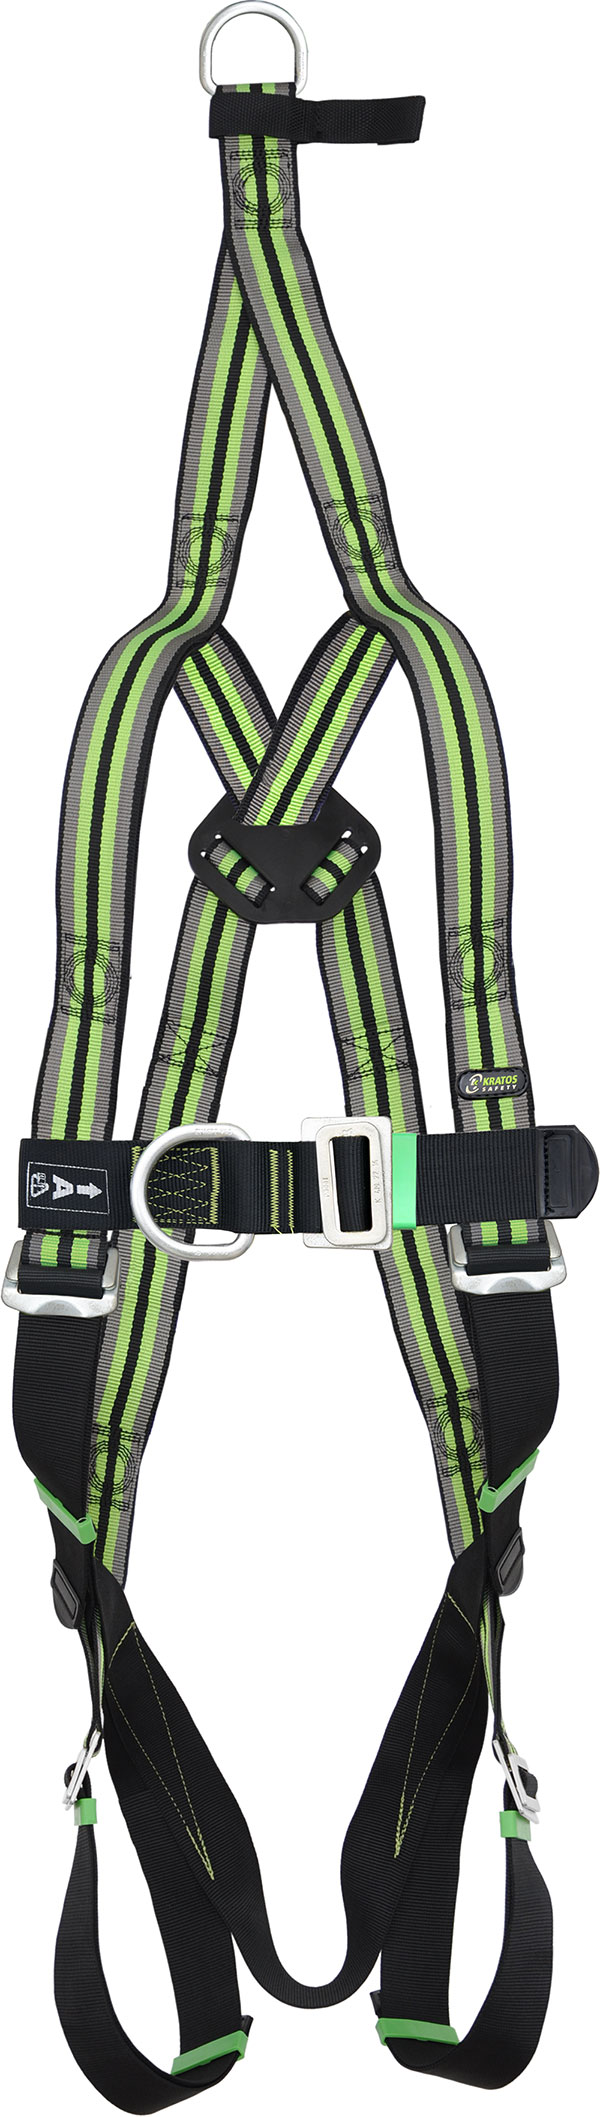 2 POINT RESCUE HARNESS - HSFA10106